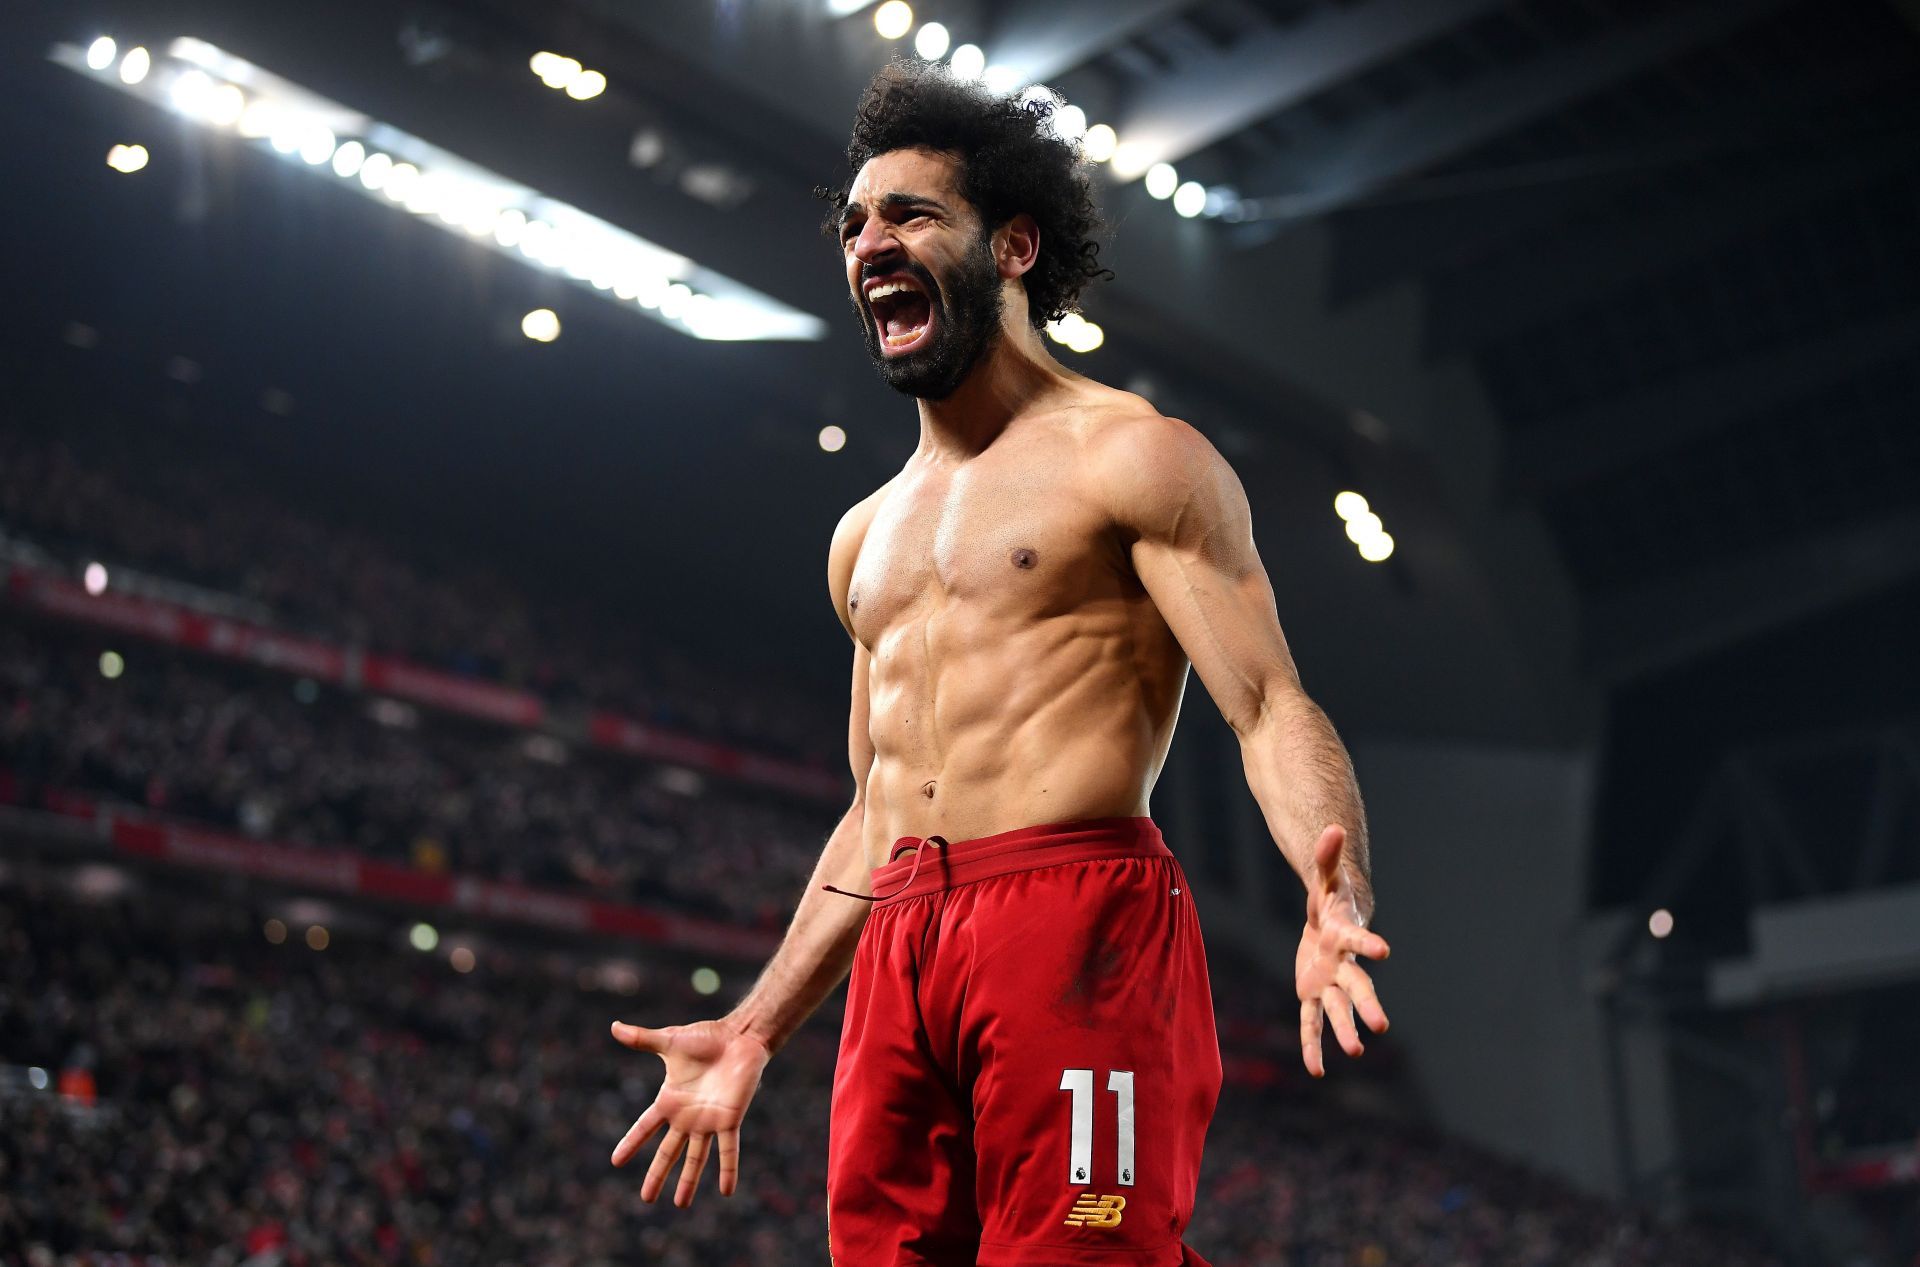 Liverpool will be hoping for Salah to fire against Manchester City